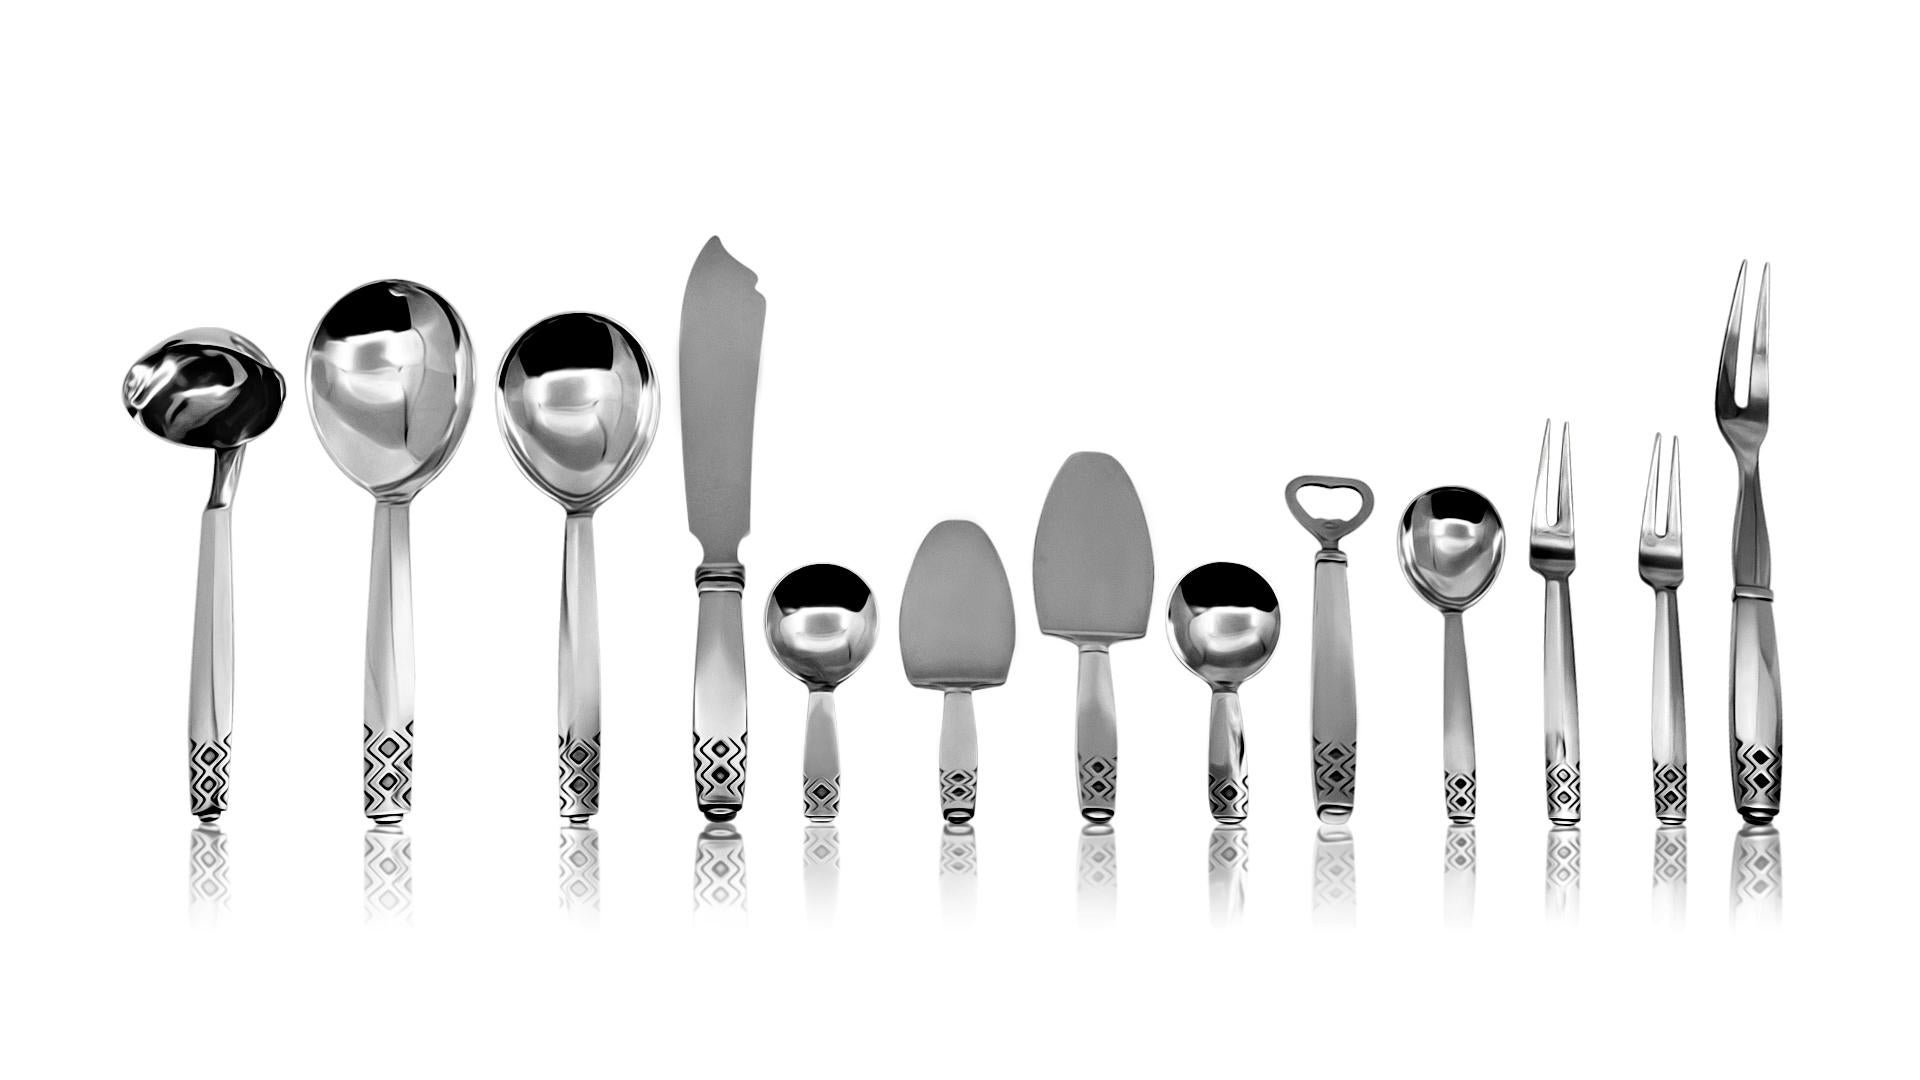 The Georg Jensen Mayan Sterling Silverware, designed by Johan Rohde circa 1930, is a remarkable collection that seamlessly blends the timeless elegance of Art Deco design with a touch of modernity. Crafted with exceptional artistry and meticulous